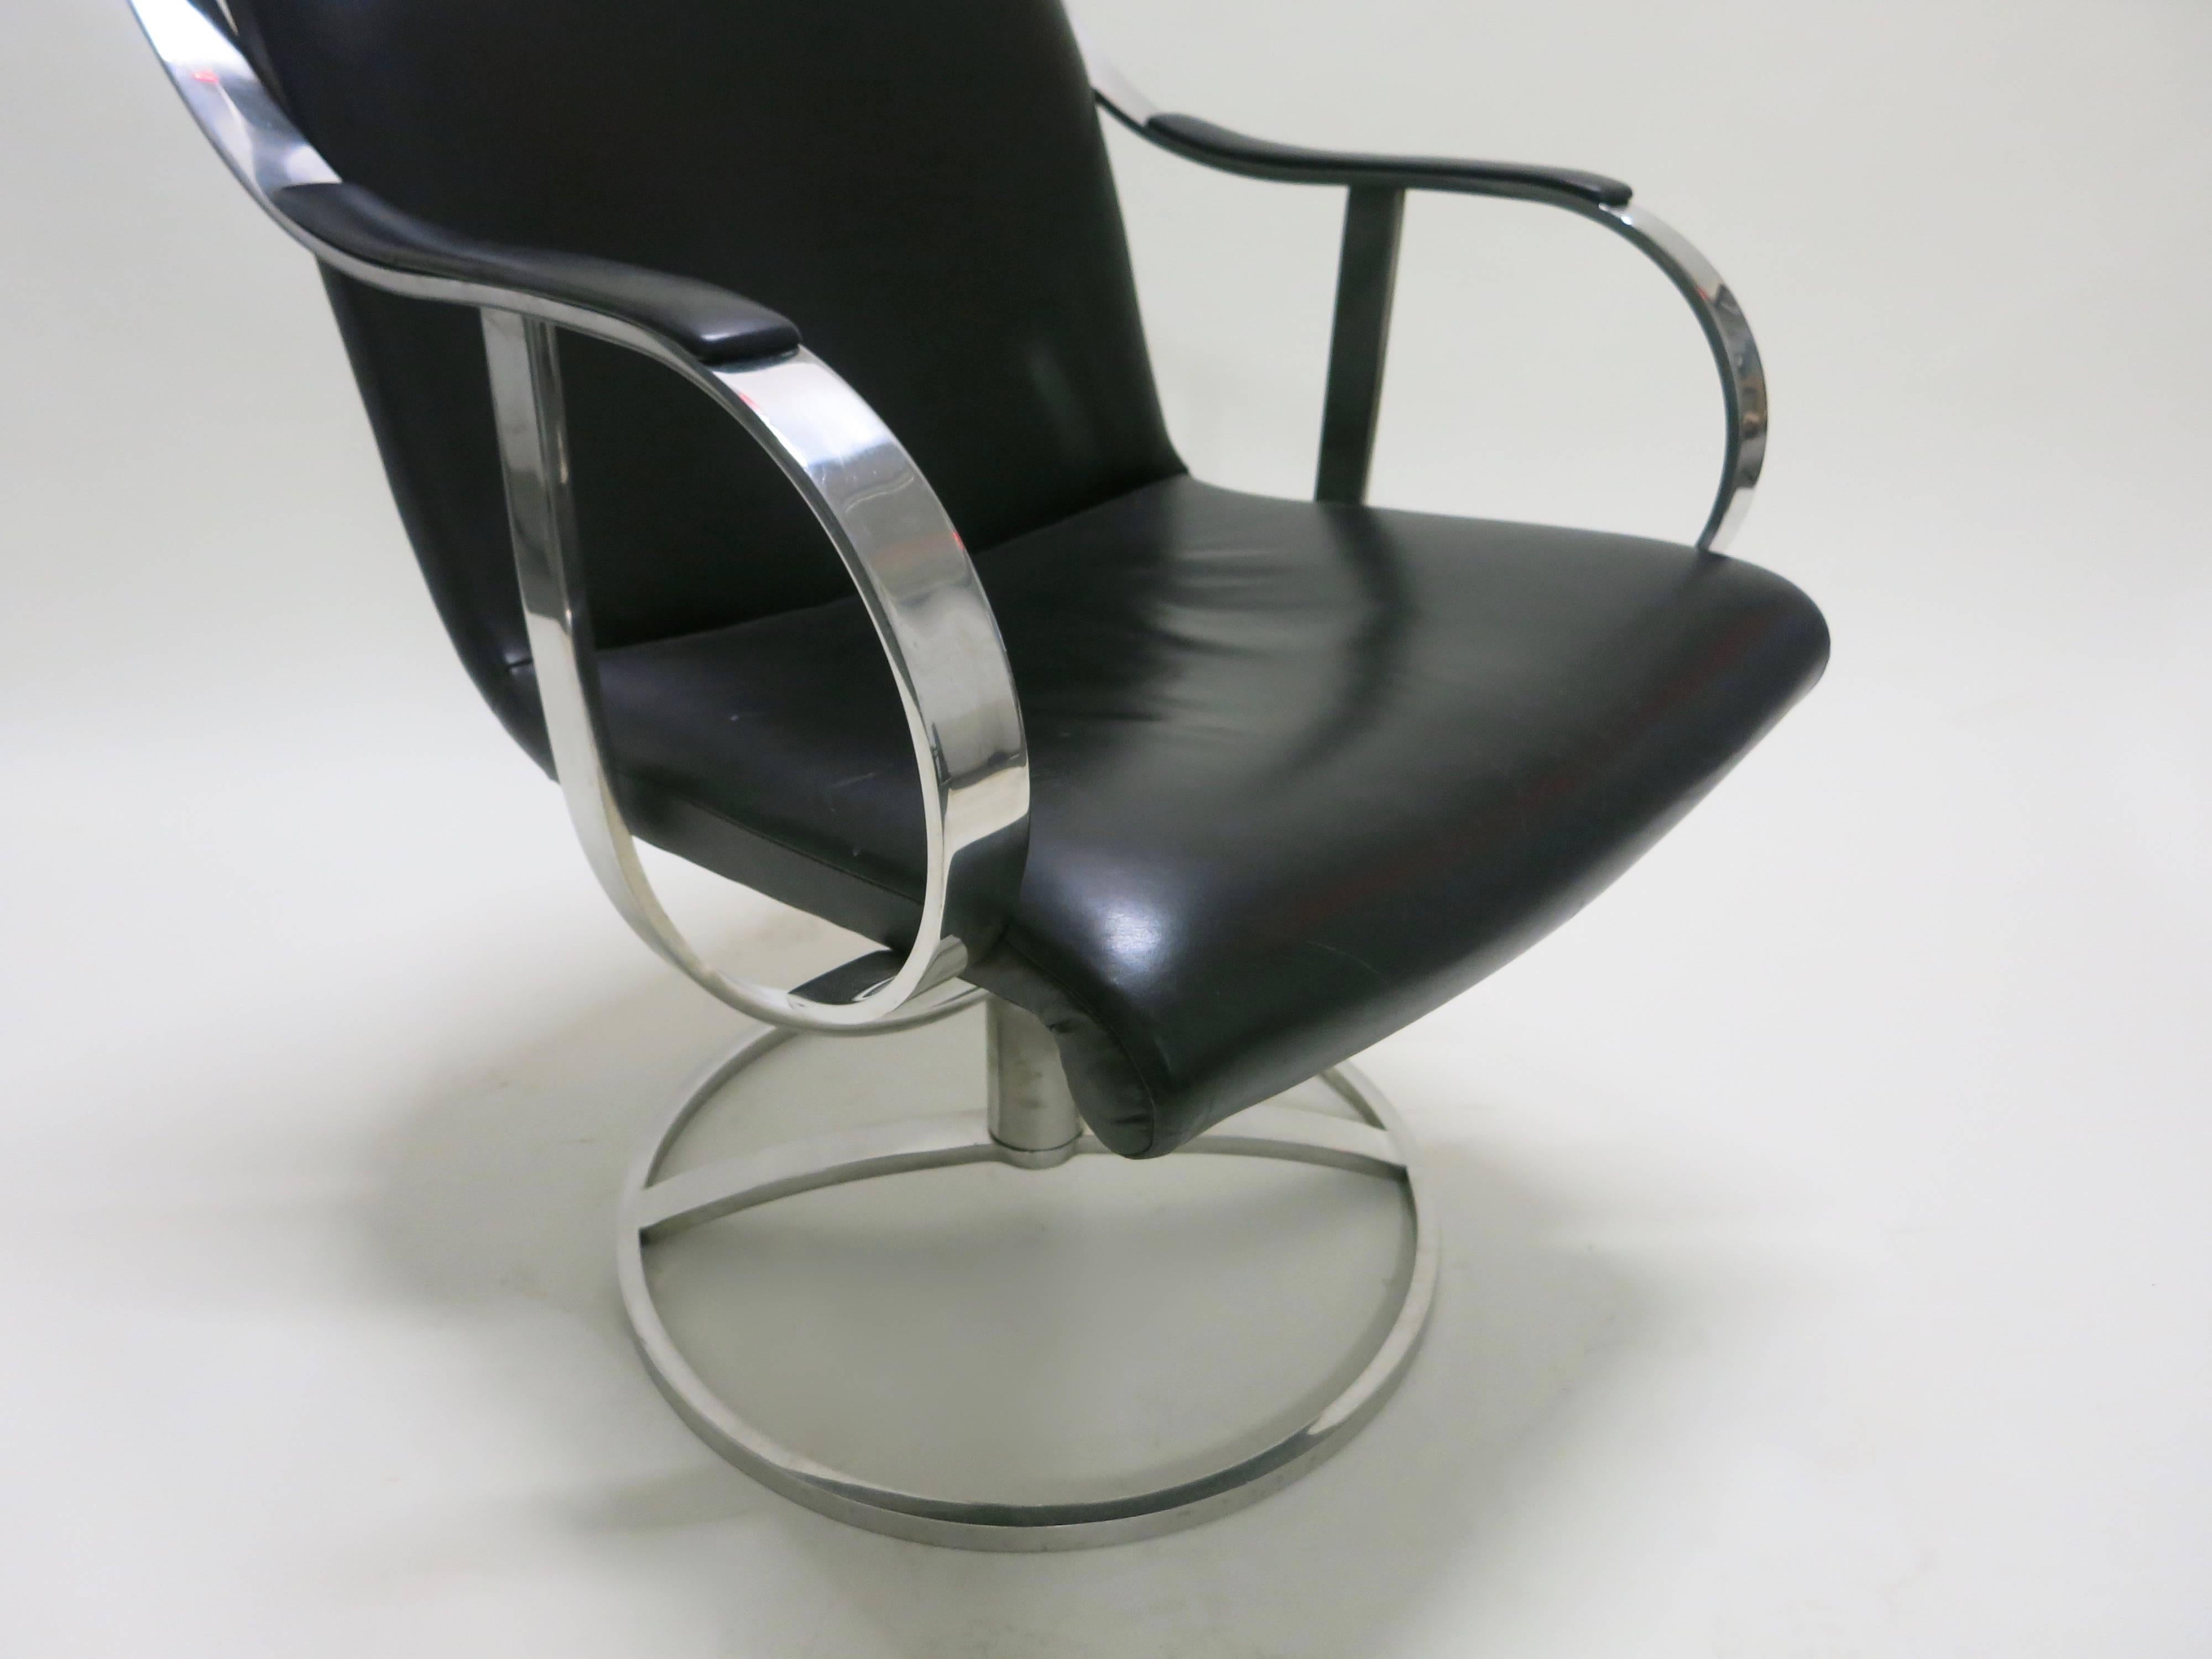 Pair of Swivel Chairs by Gardner Leaver for Steelcase, circa 1965, American 5